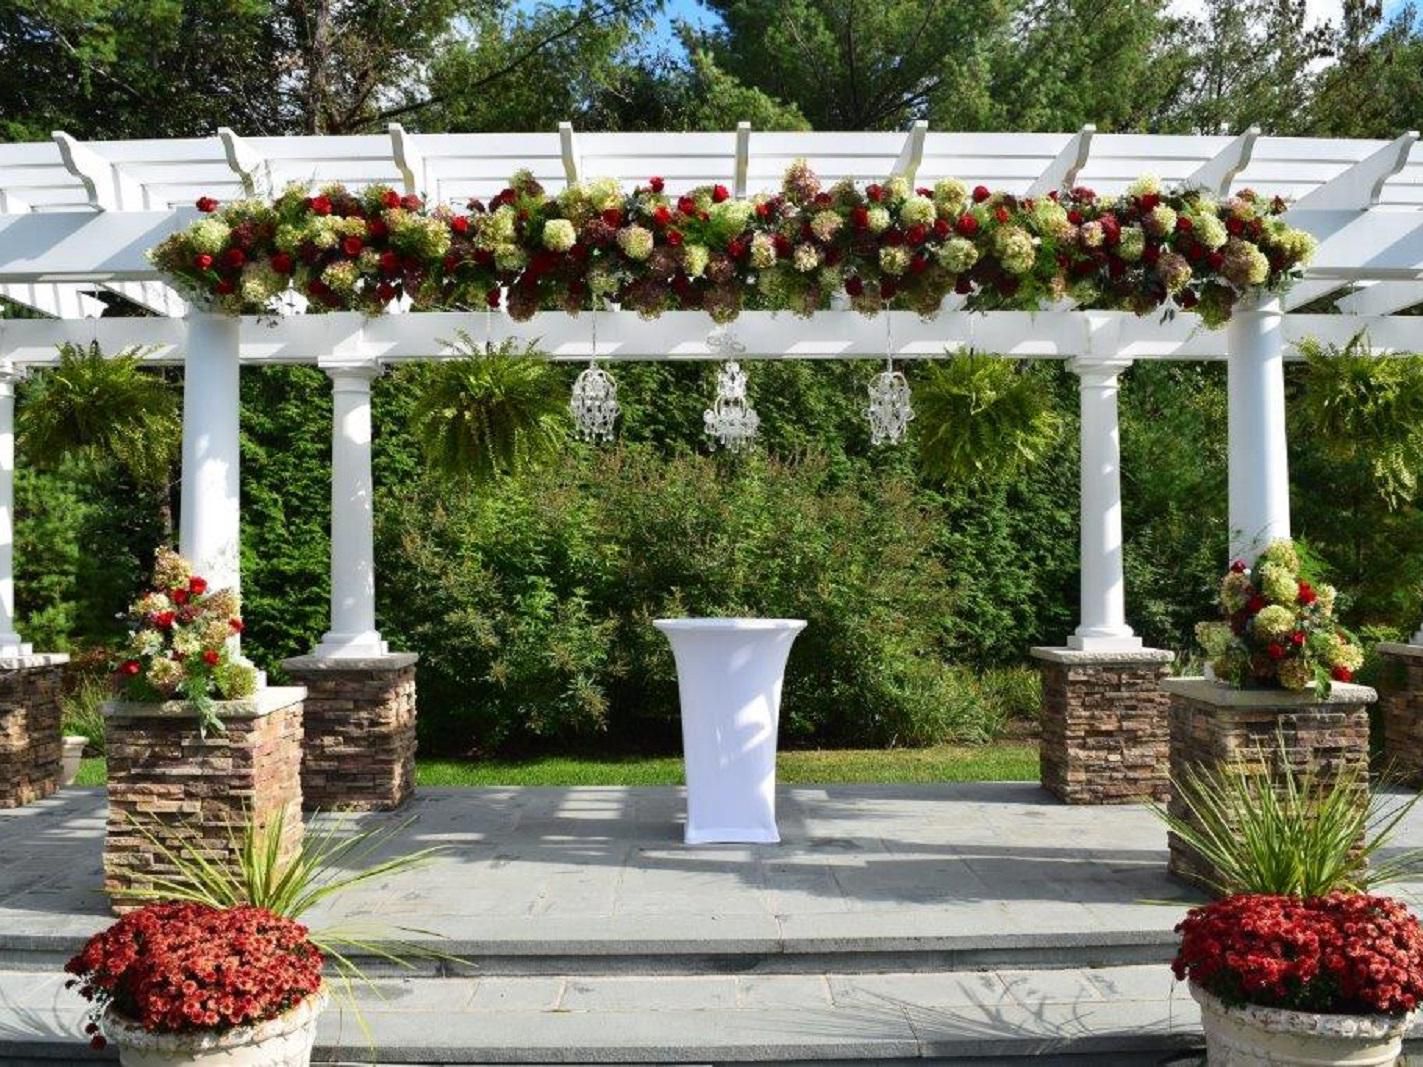 Your one-stop shop for weddings and special events. Beautiful outdoor ceremony space, unique waterfalls garden reception, and delicious food. All in one location, we create and you celebrate.